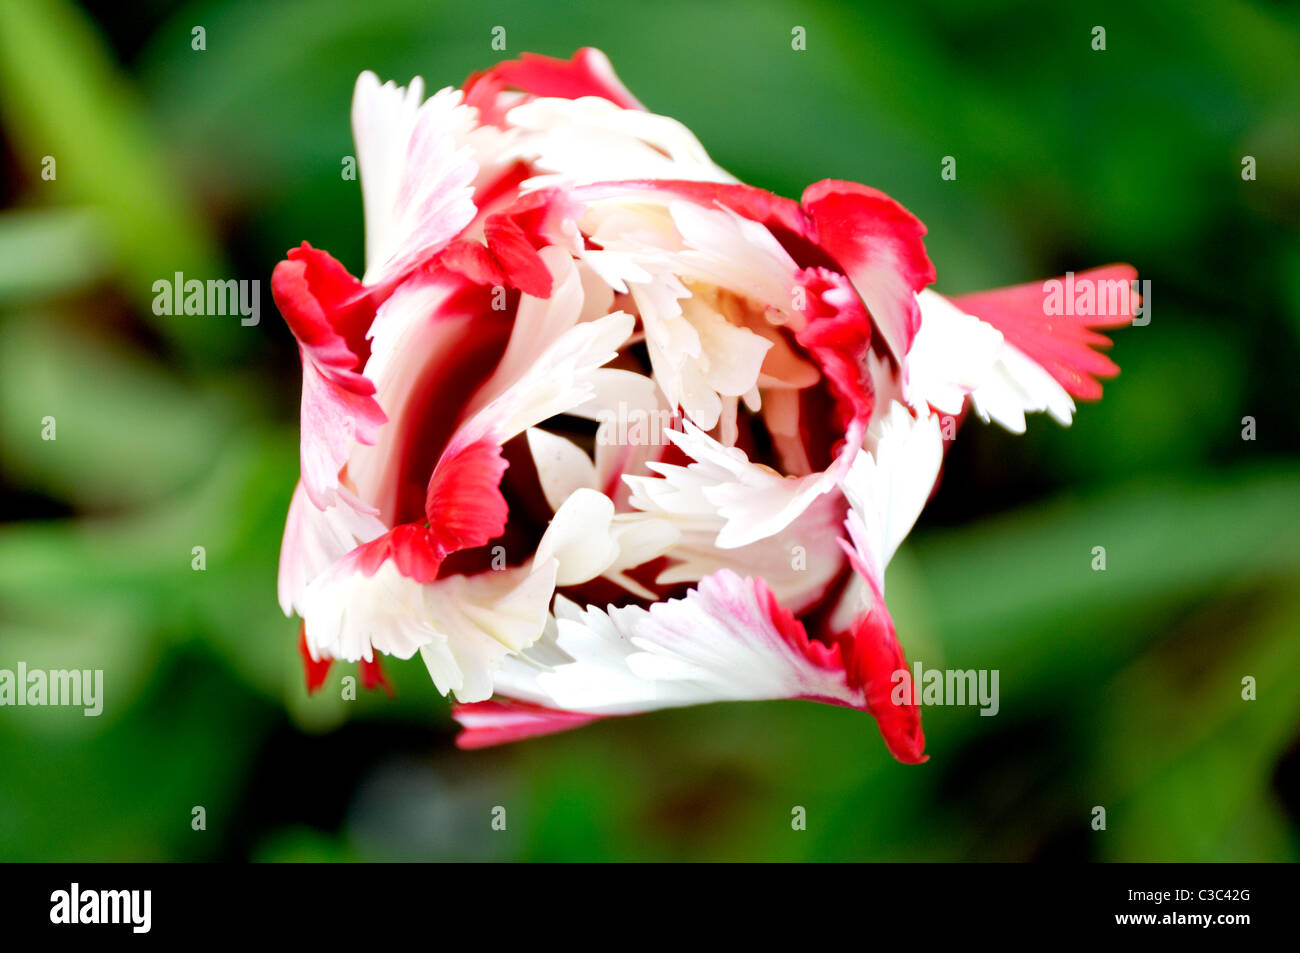 A beautiful red and white garden flower. Stock Photo